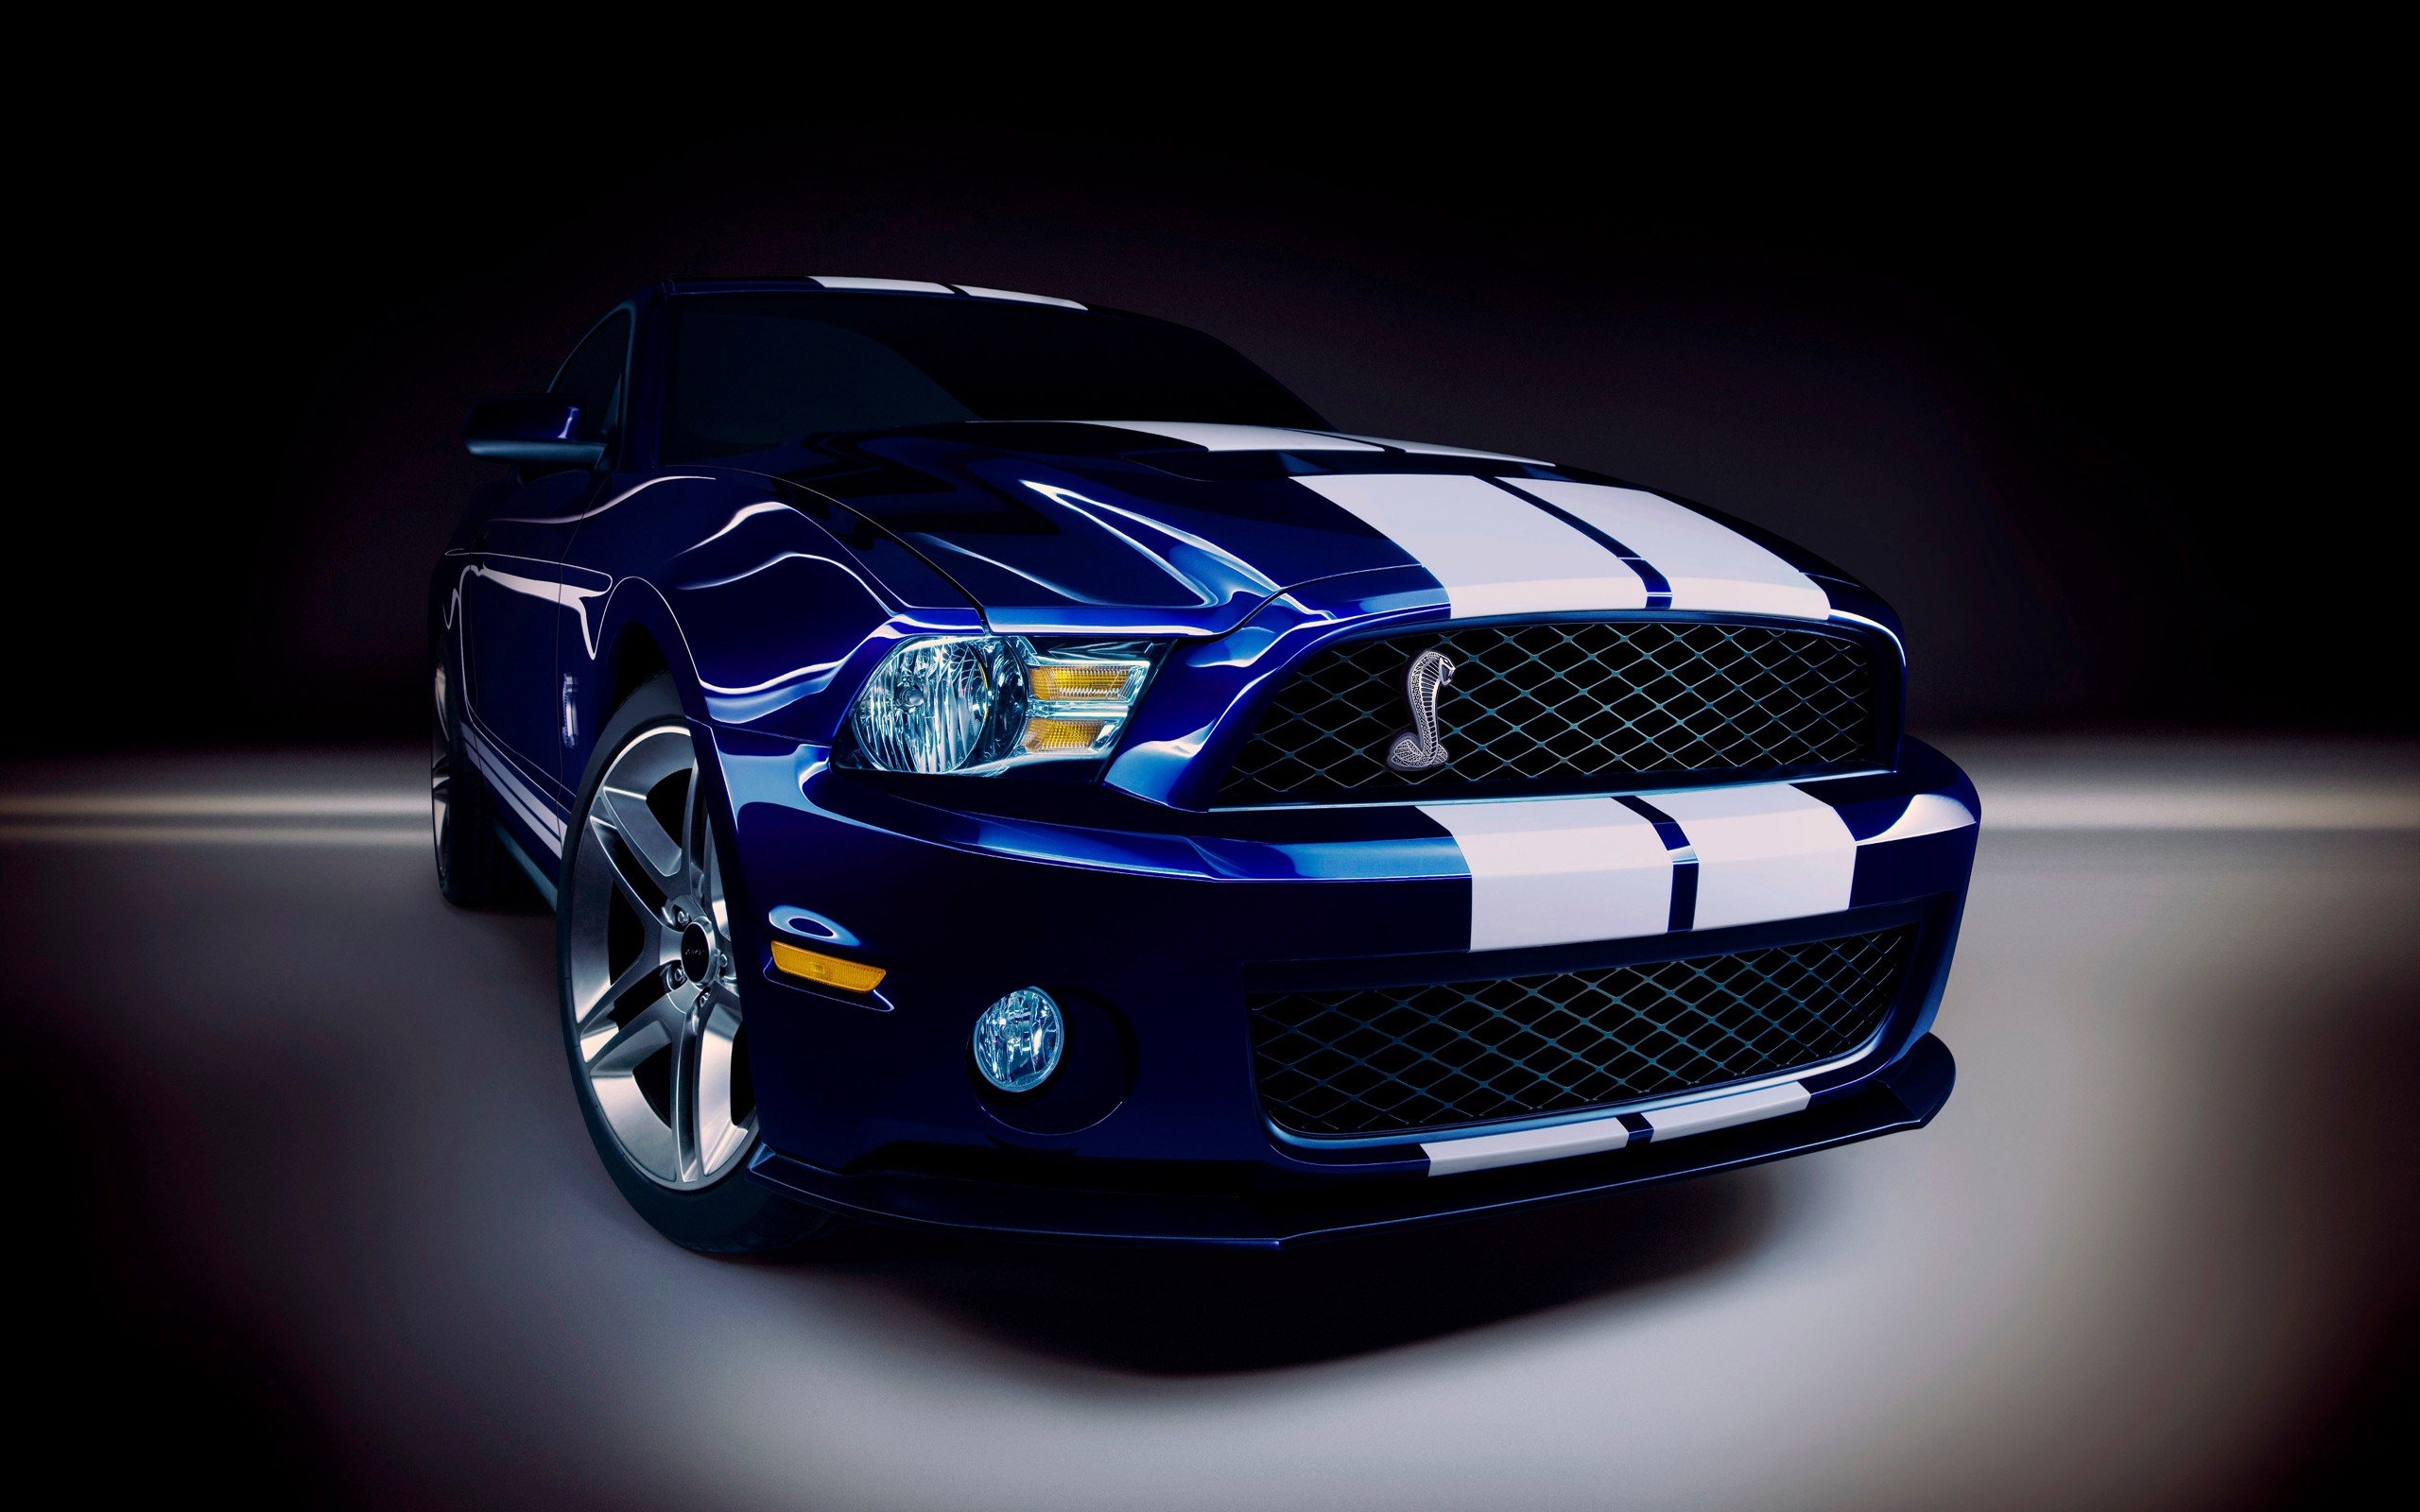 Cars vehicles ford mustang shelby cobra emblem wallpaper background 2560x1600